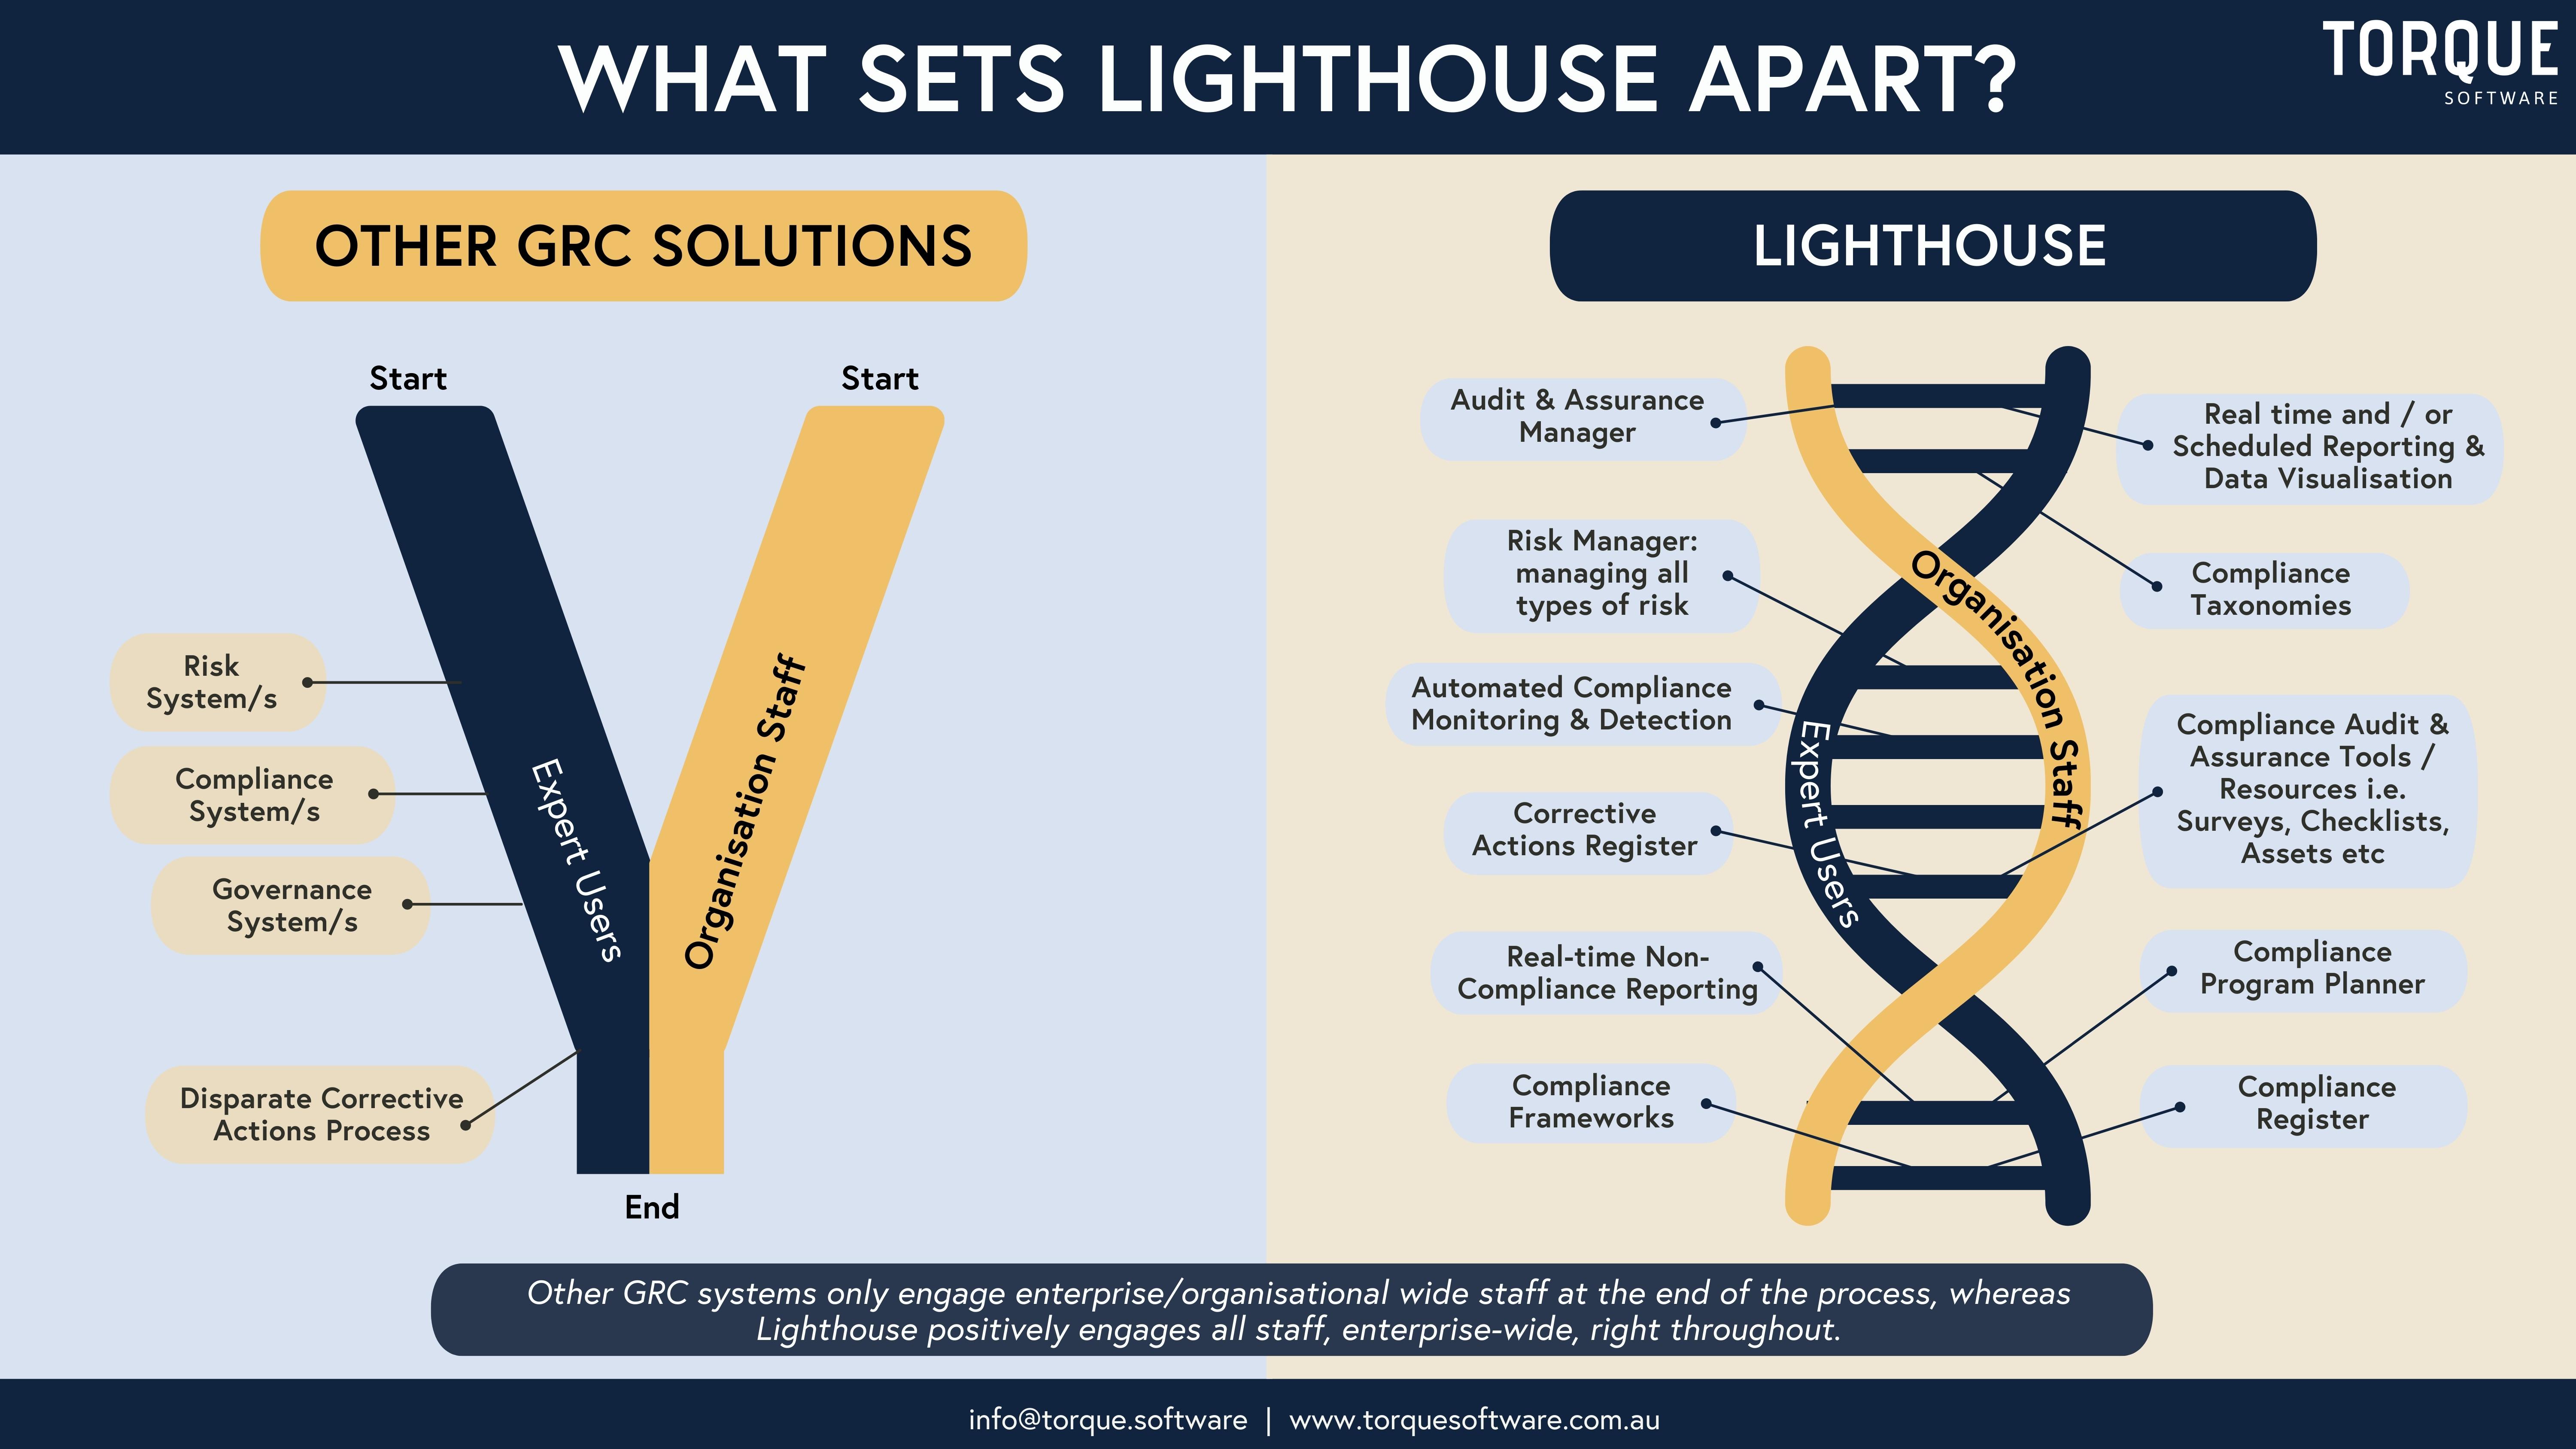 Graphic that shows what sets Lighthouse apart from other GRC solutions.